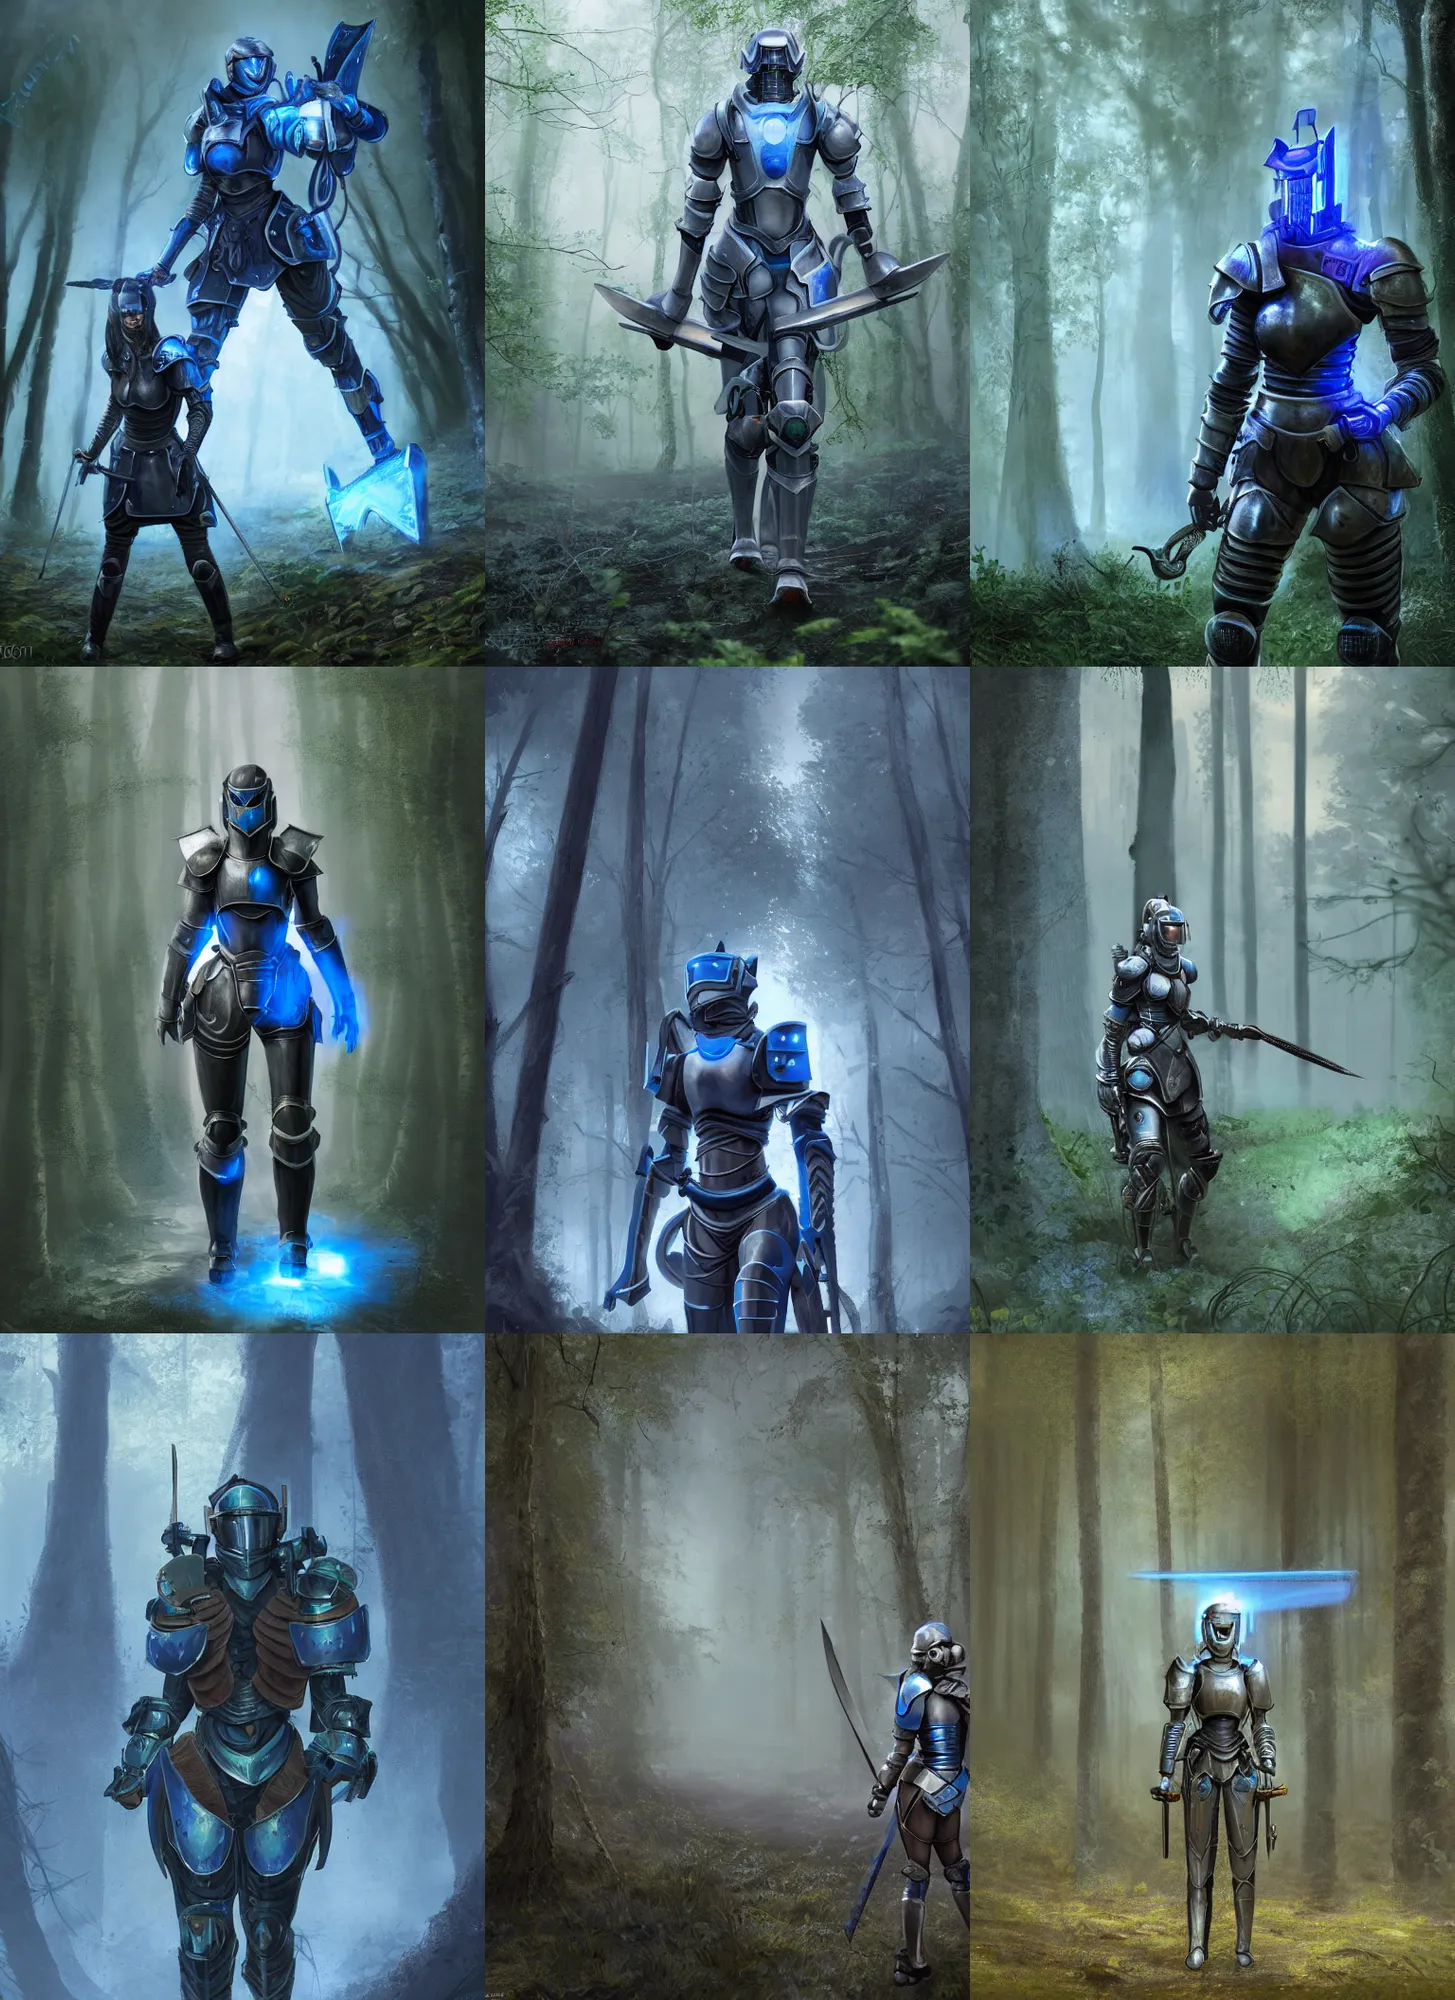 Prompt: a matte painting of a female knight with glowing blue eyes wearing battle worn mechanical armor wielding twin swords walking through the forest plains of north yorkshire, misty forest, apex legends armor, good value control, concept art, digital painting, sharp focus, symmetrical, segmented armor, single character full body, 4k, illustration, rule of thirds, sci-fi, elden ring, centered, moody colors, moody lighting, atmospheric